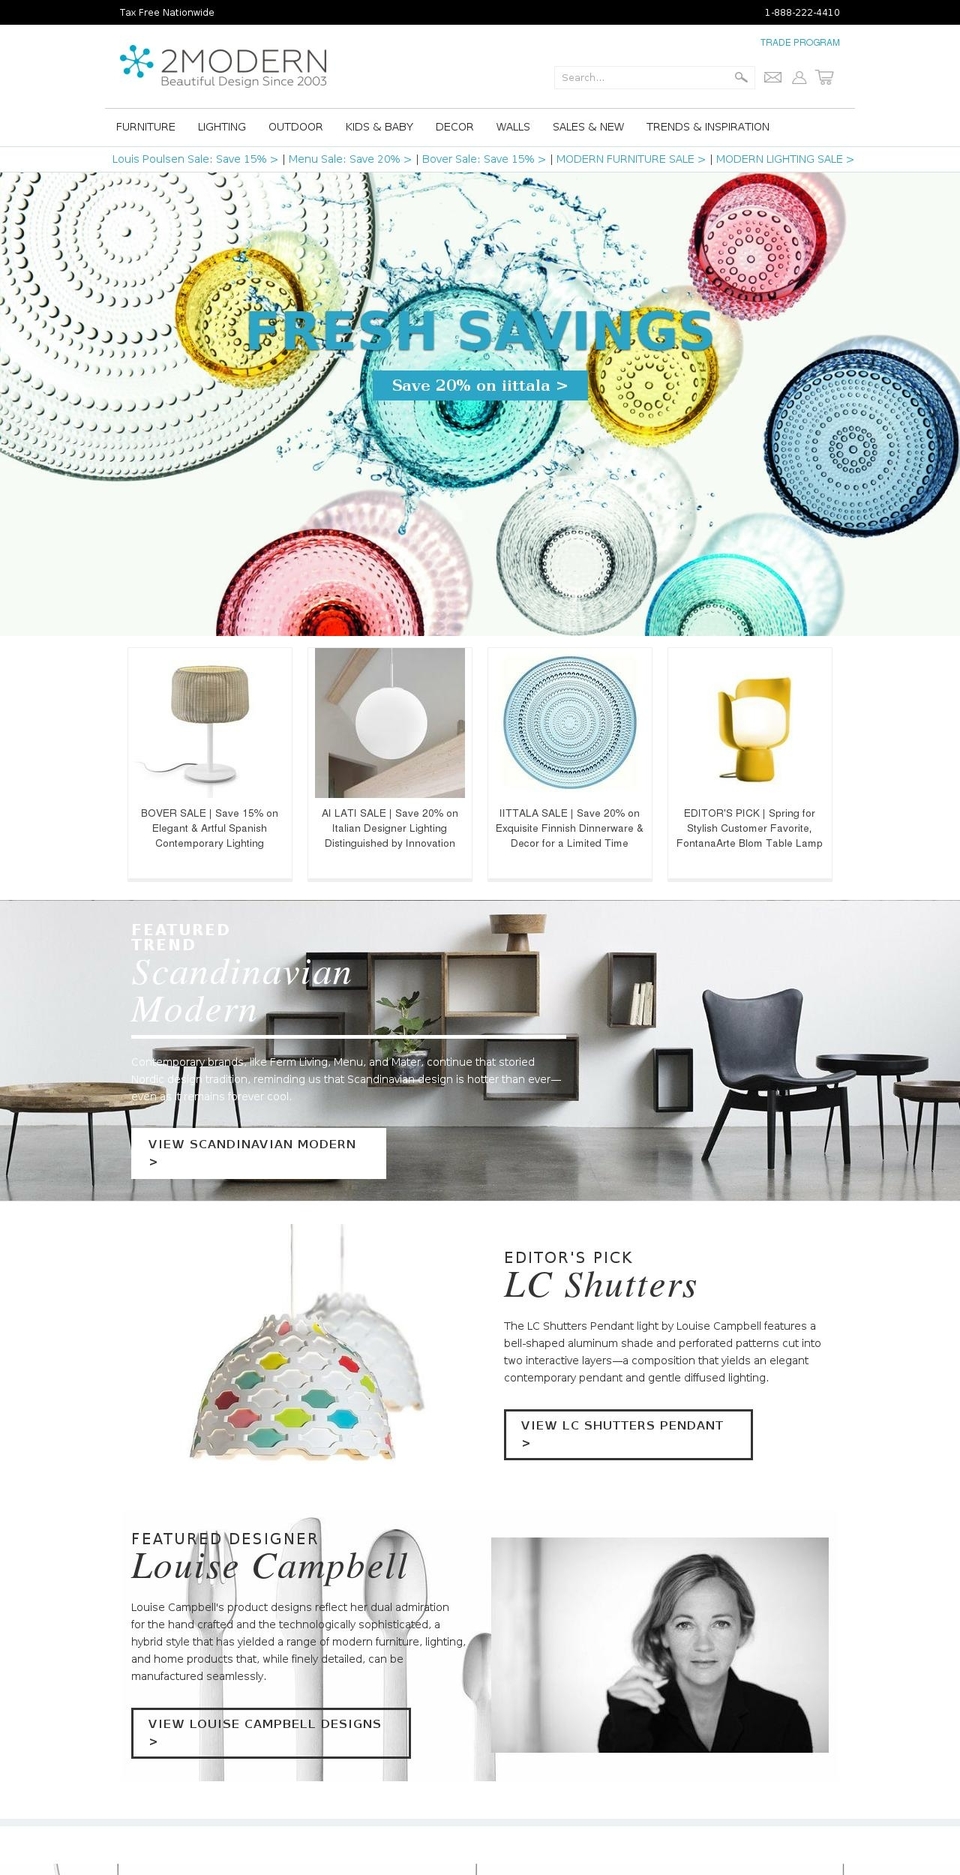 Production Shopify theme site example 2modern.com